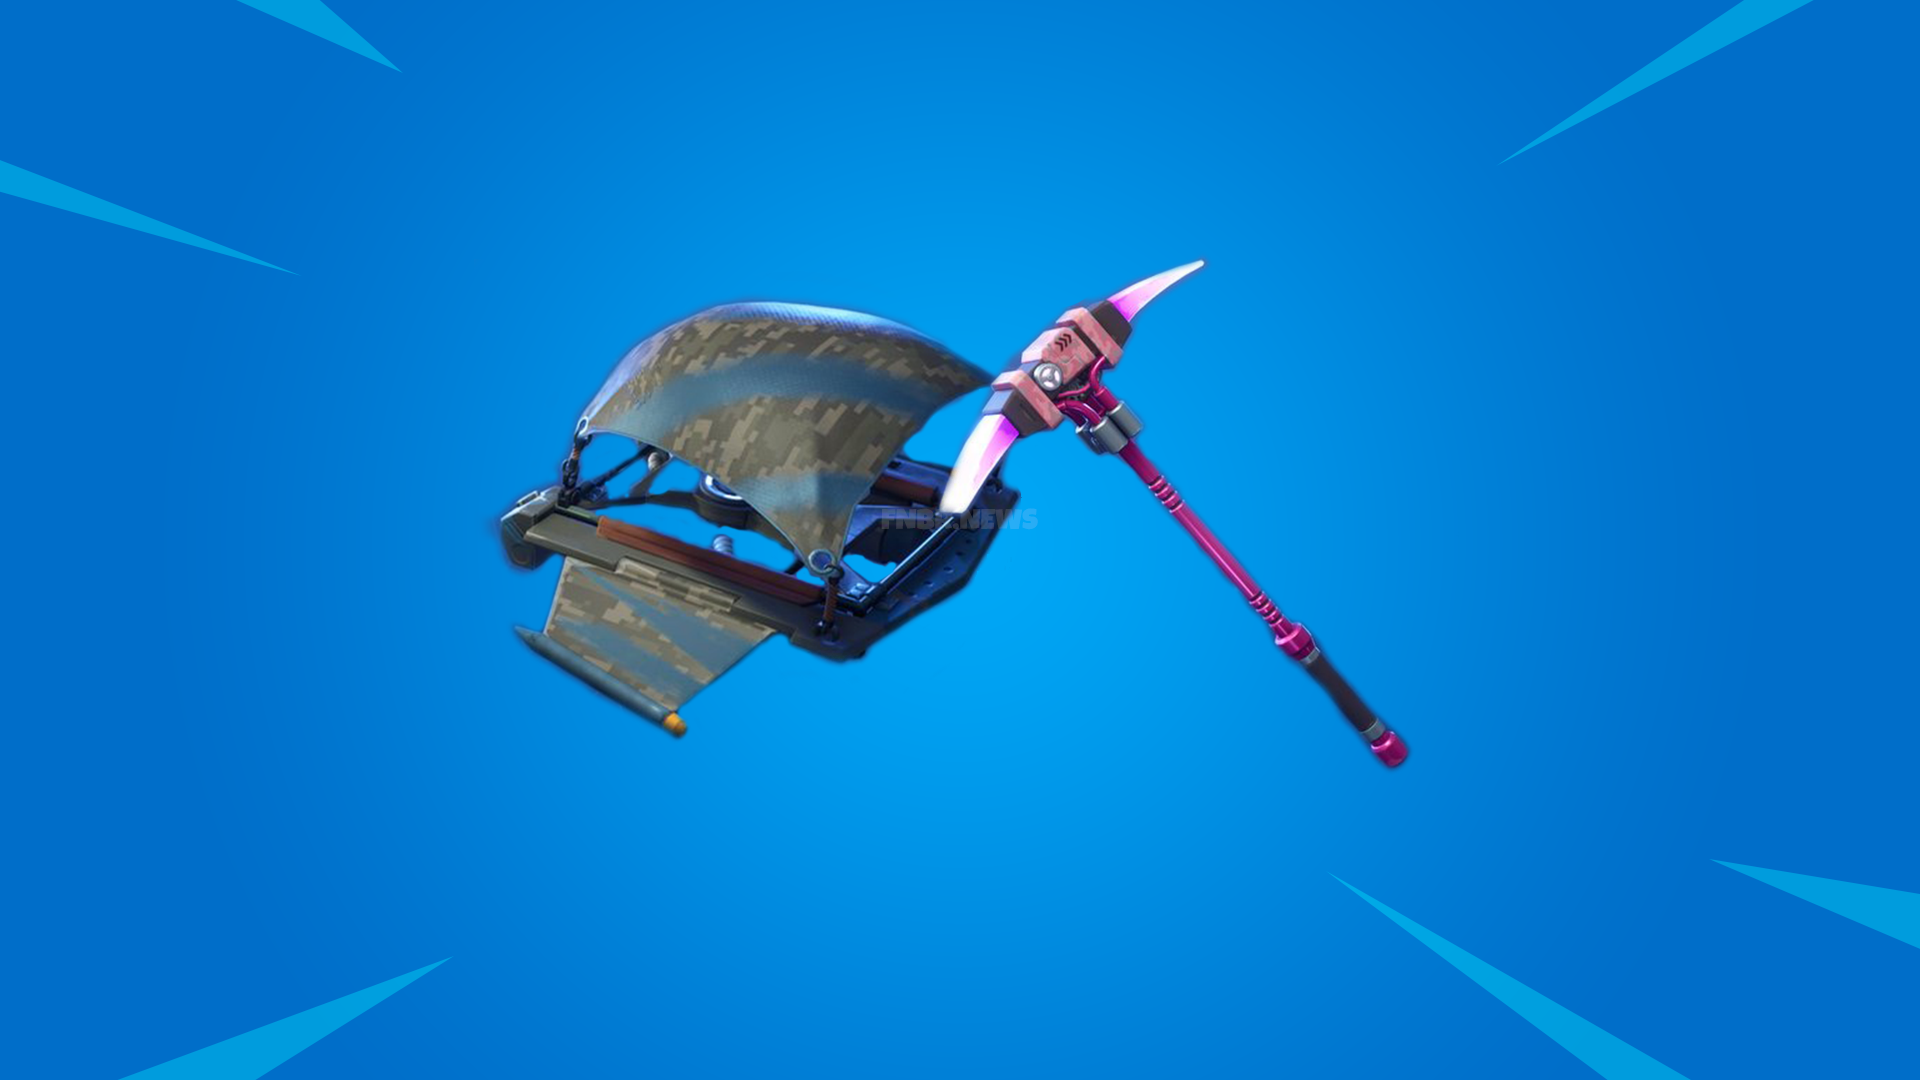 leak more battle royale rewards for save the world founders coming to fortnite - founders pack rewards fortnite